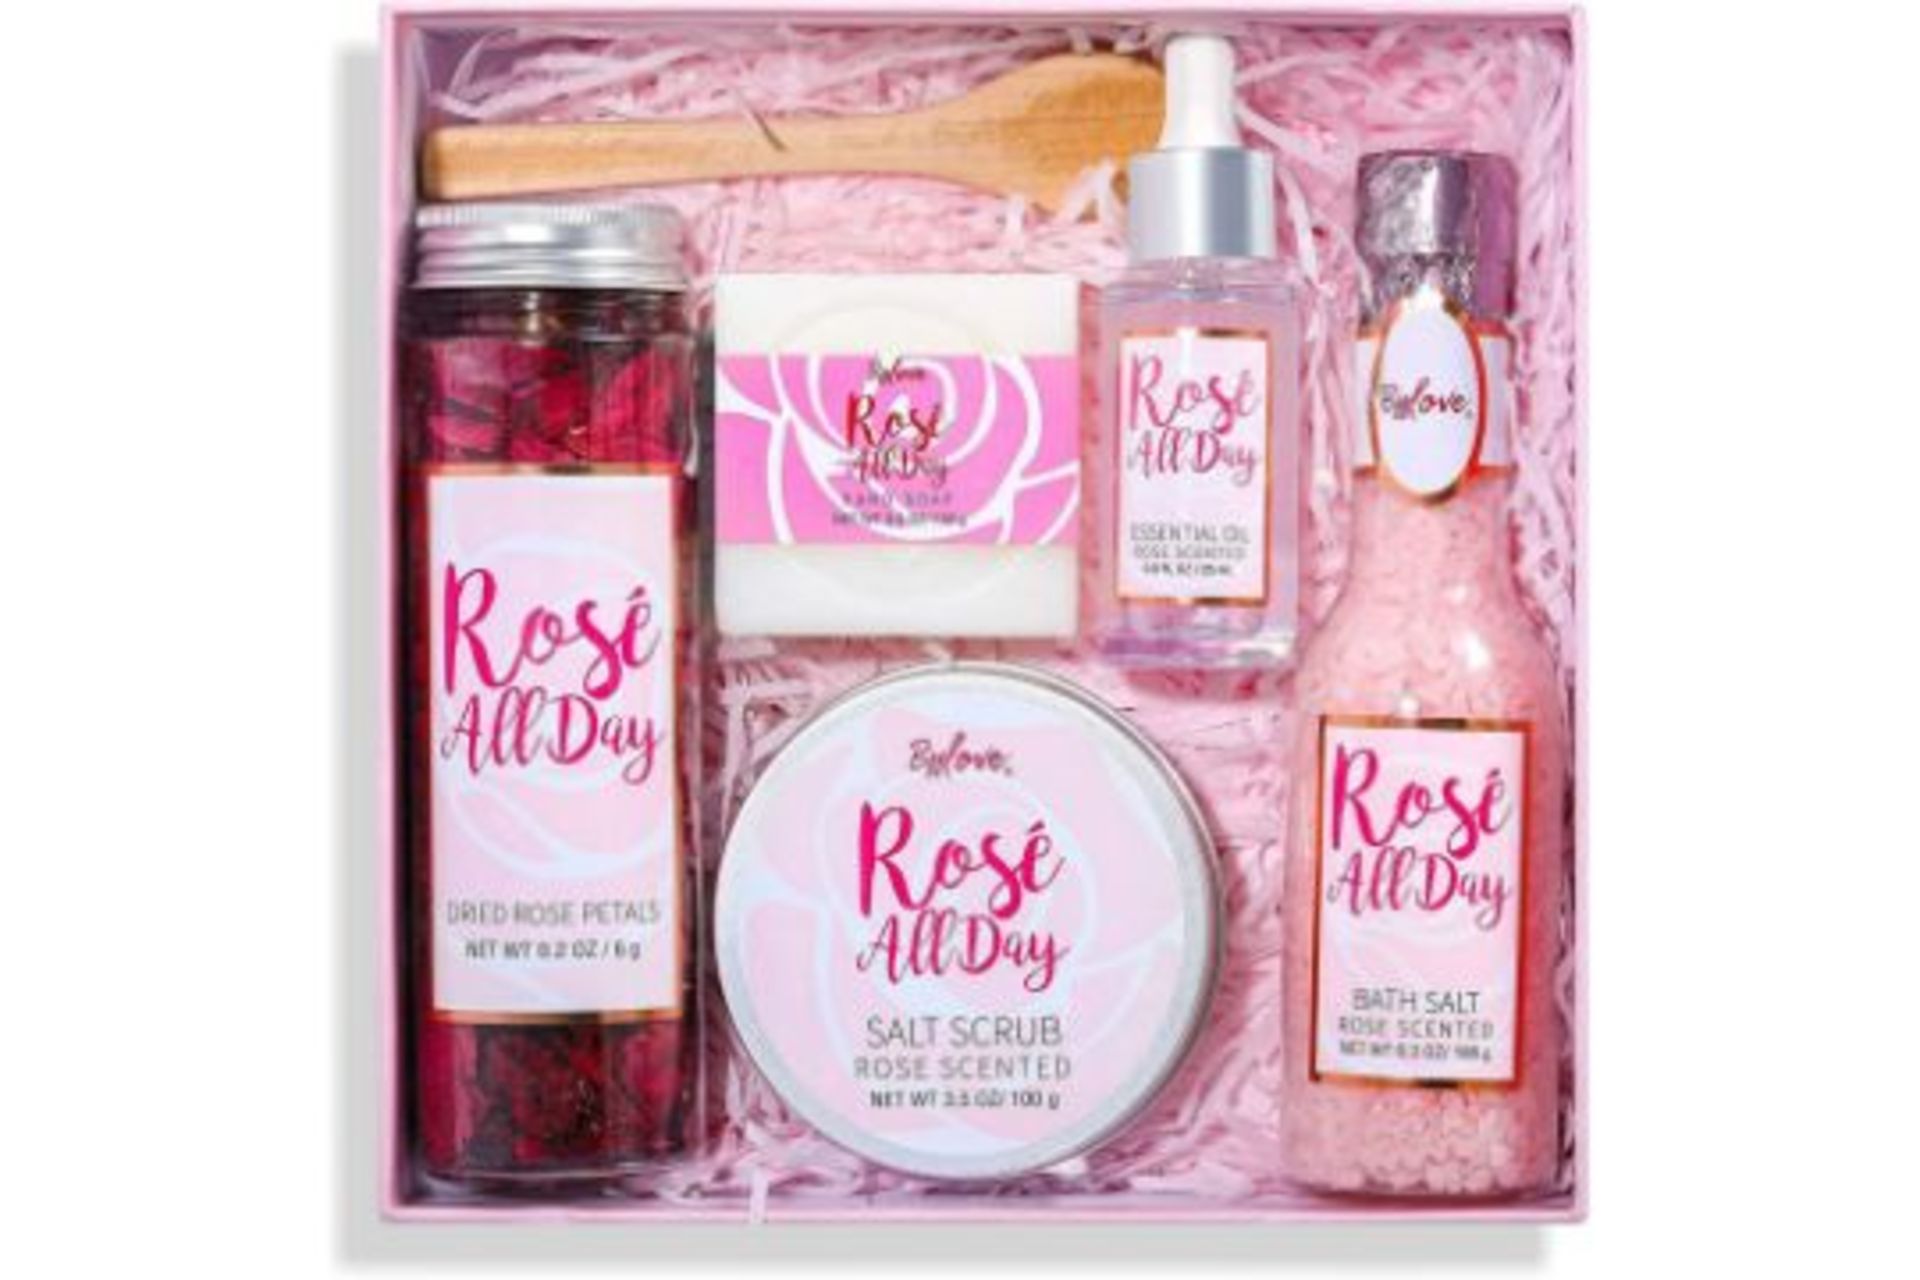 12 X NEW PACKAGED Rose All Day Bath Gift Box. (SKU:BFF-BP-11) Best Gift Set for Women - Our spa gift - Image 2 of 2